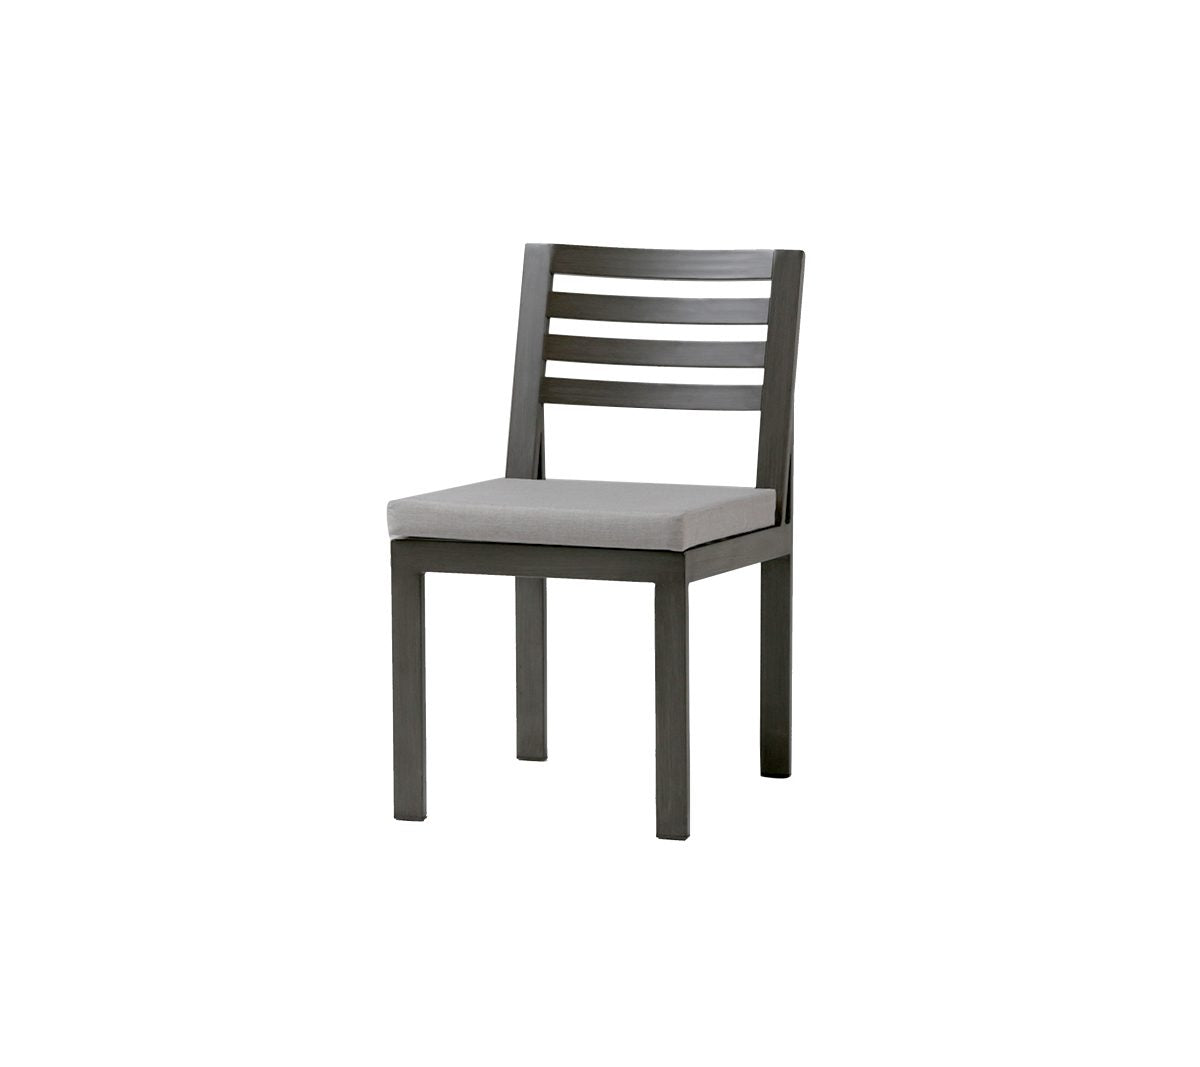 Ratana Element 5.0 Outdoor Dining Side Chair